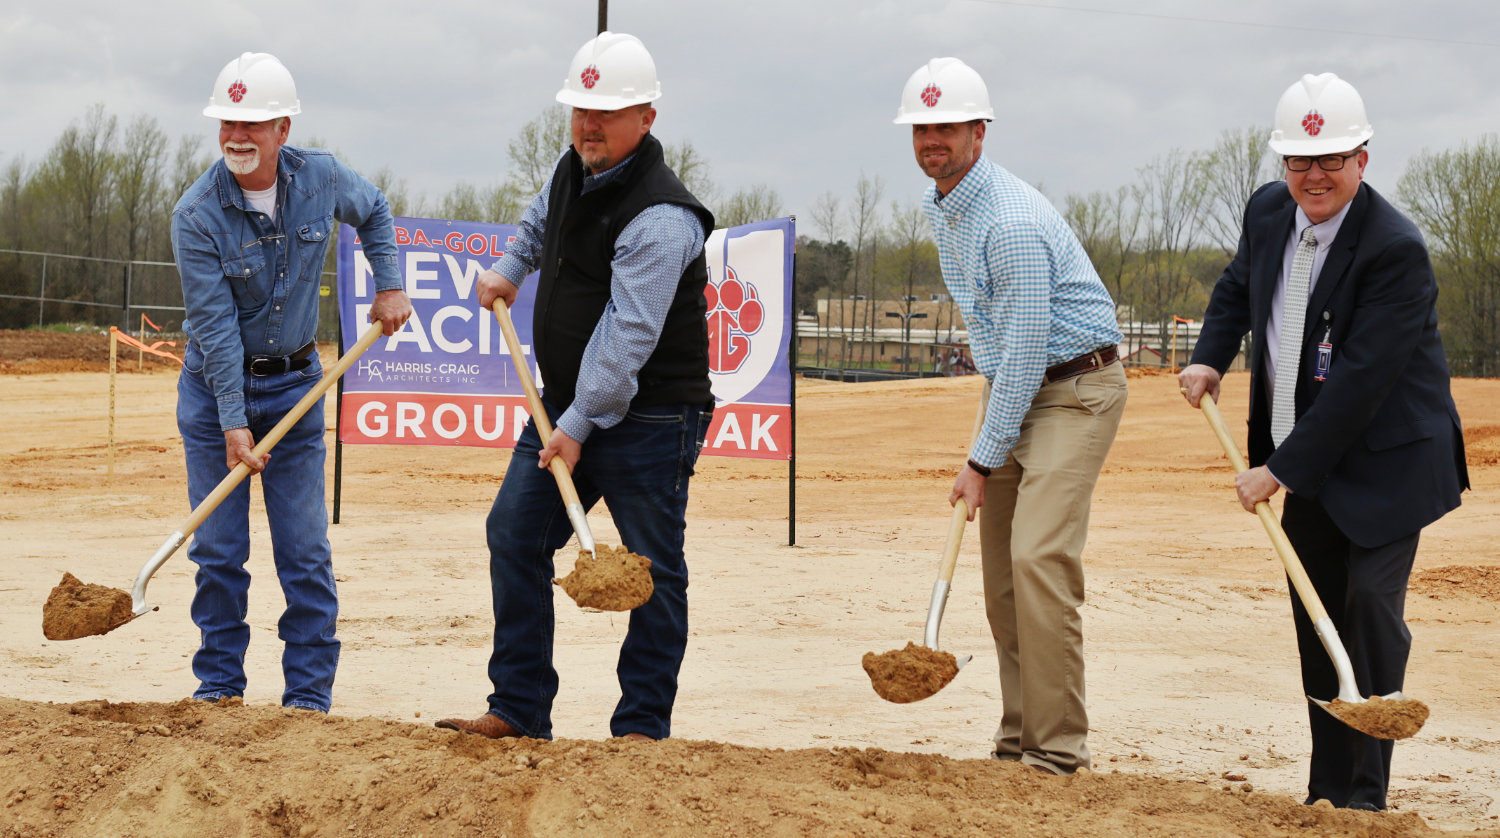 Alba-Golden Trustees and Superintendent wield shovels at the groundbreaking of the new Agricultural Project Facility at Alba-Golden Schools. From left: Mike Ragsdale, Chad Dailey, Jason Stovall and Superintendent Cole McClendon.